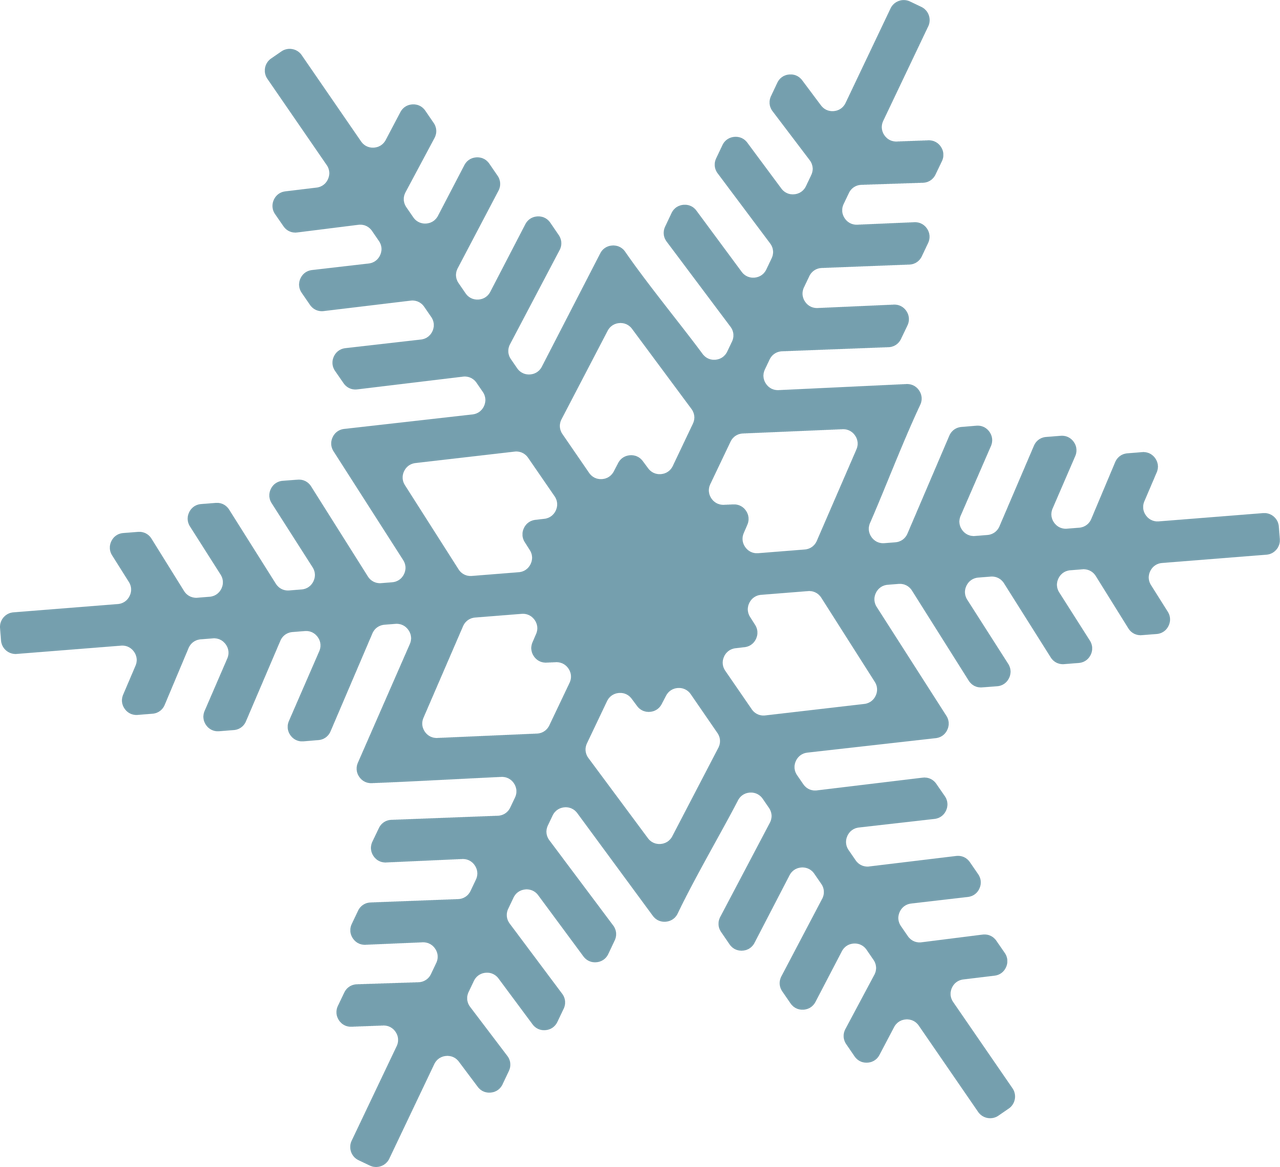 Download Snowflake #26 SVG Cut File - Snap Click Supply Co.